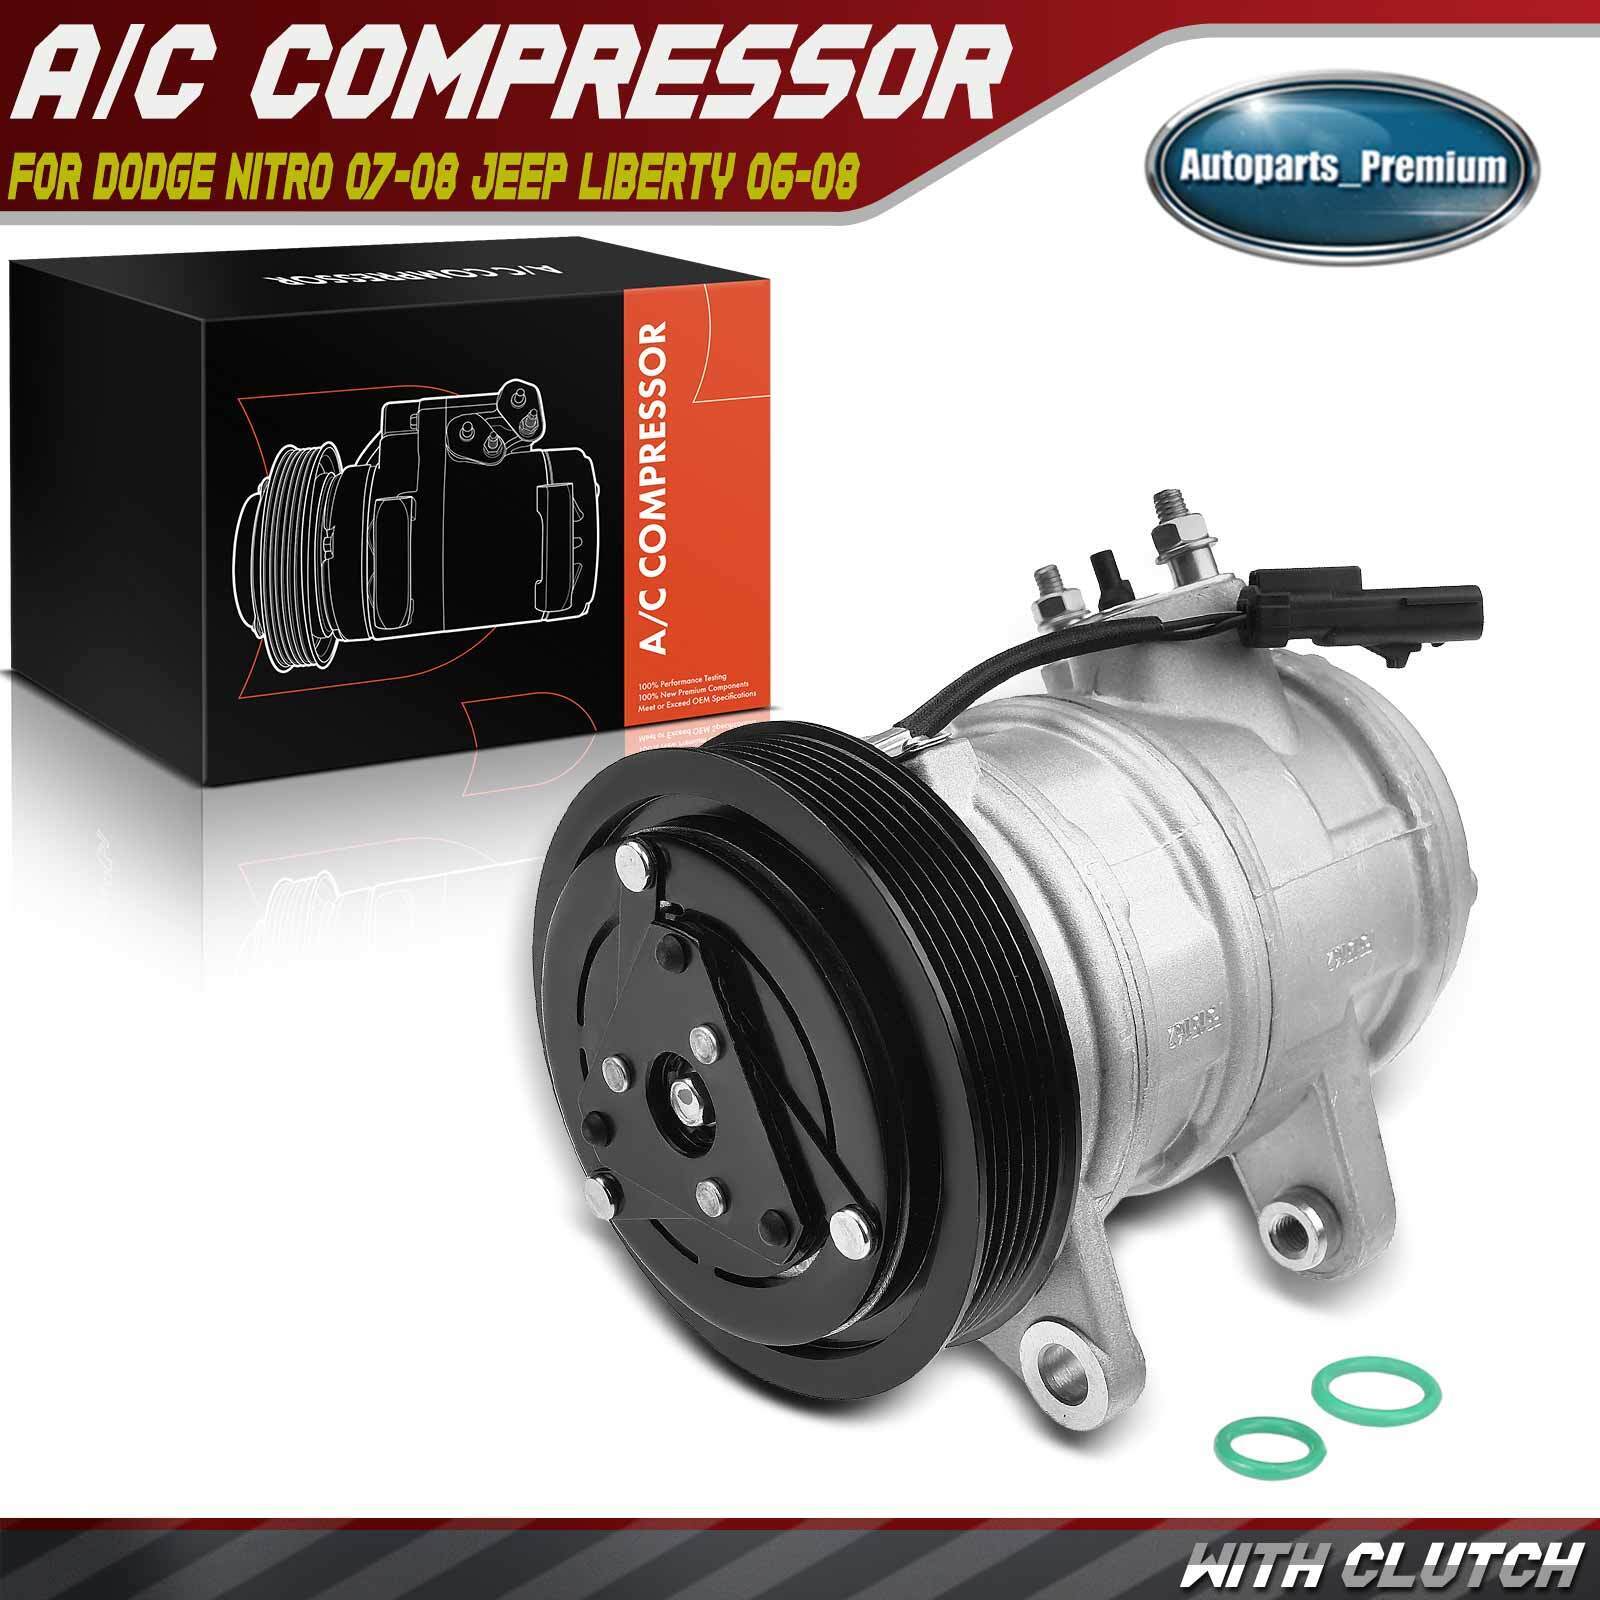 New AC Compressor with Clutch for Dodge Nitro 2007-2008 Jeep Liberty 2006-2008